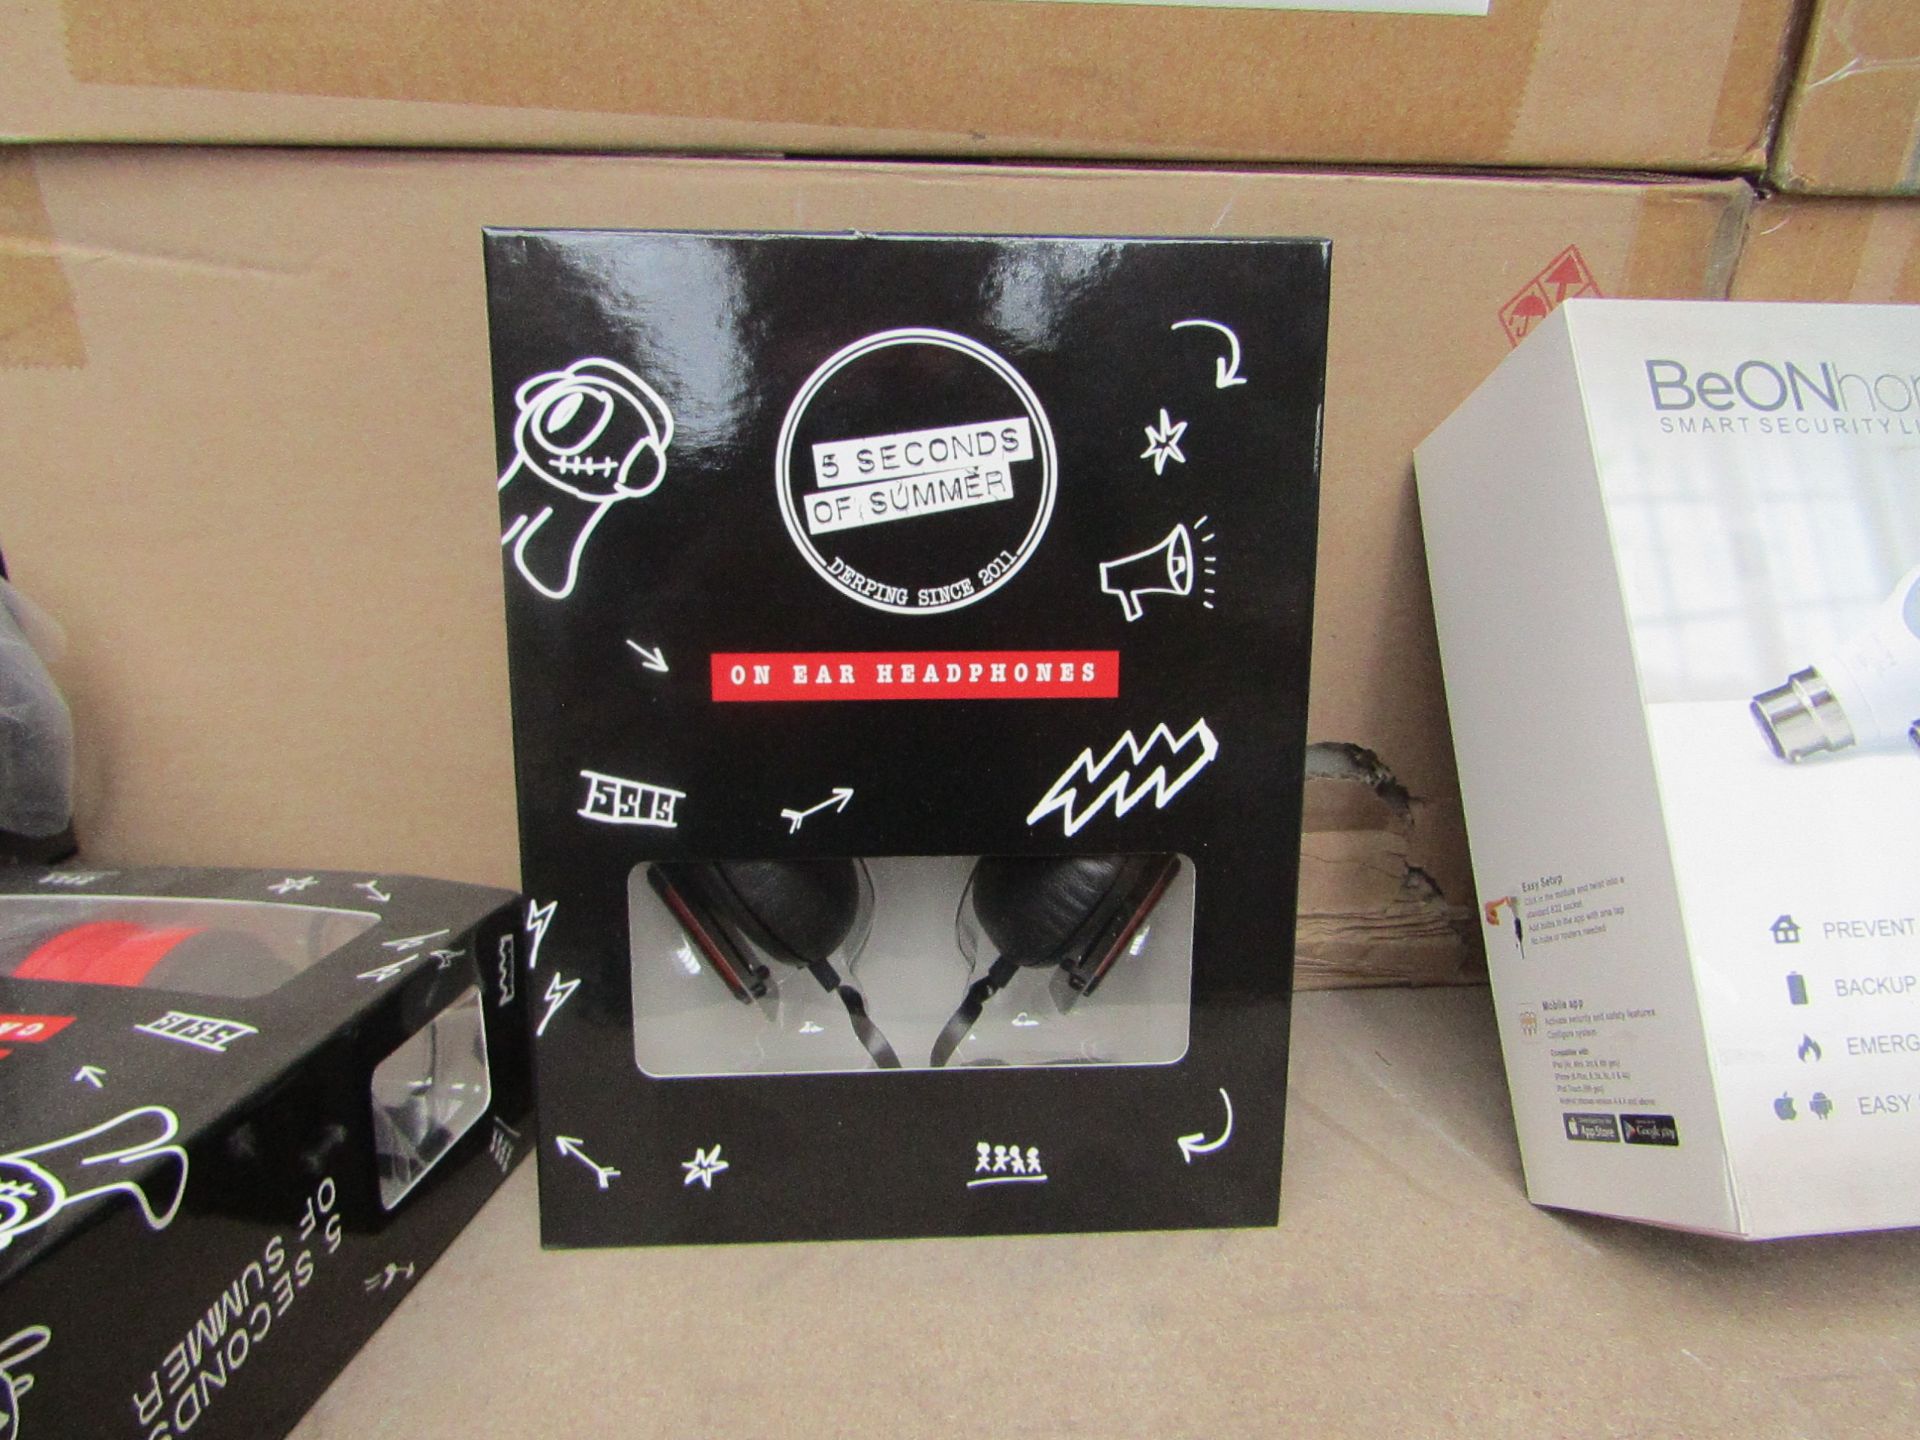 12x 5 Secondds of Summer branded on ear headphones, new and packaged.